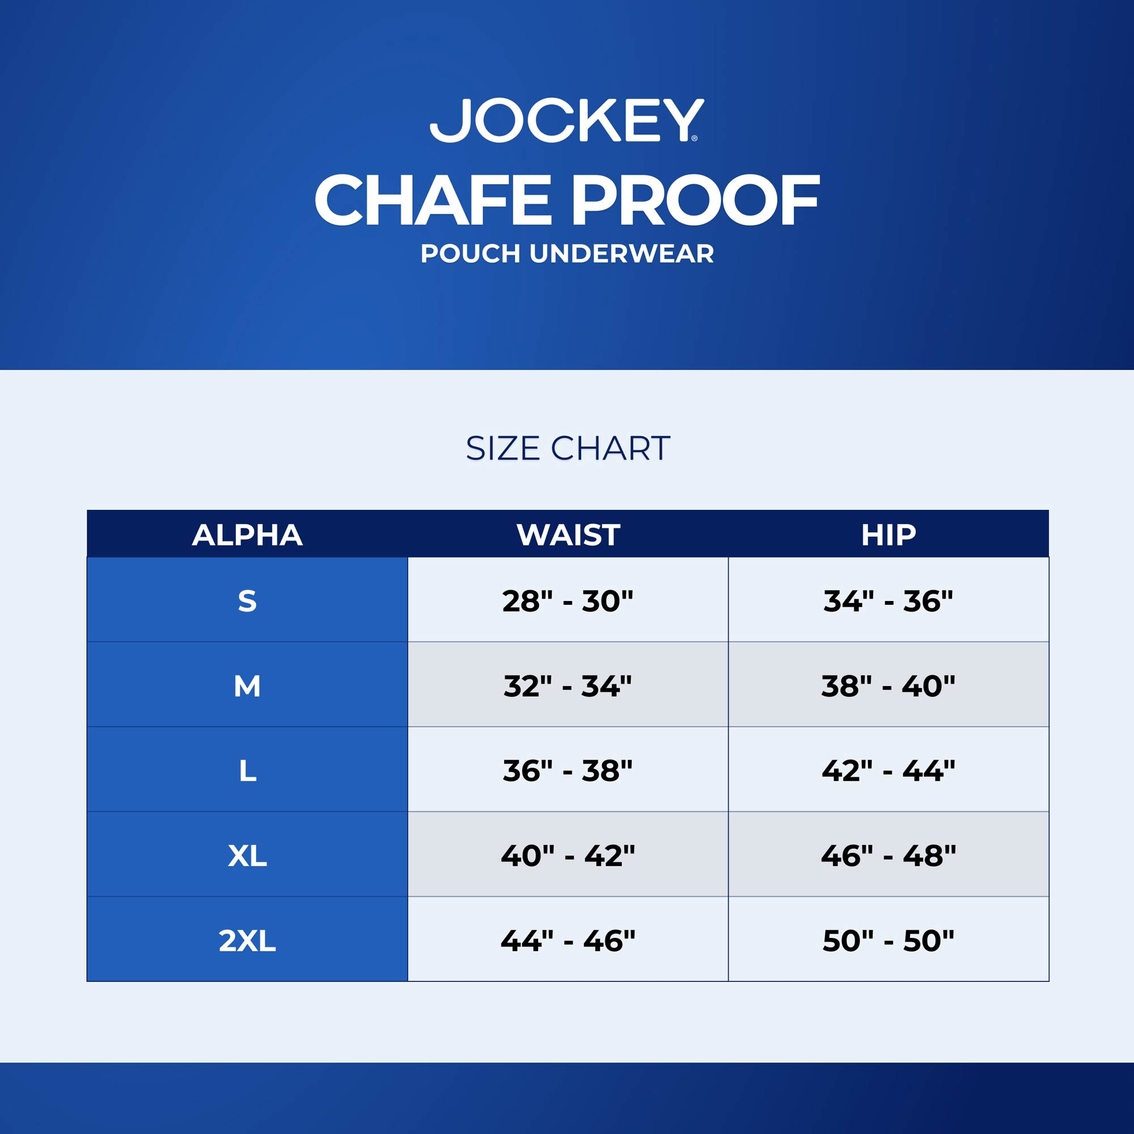 Jockey Chafe Proof Cotton Boxer Briefs - Image 7 of 7